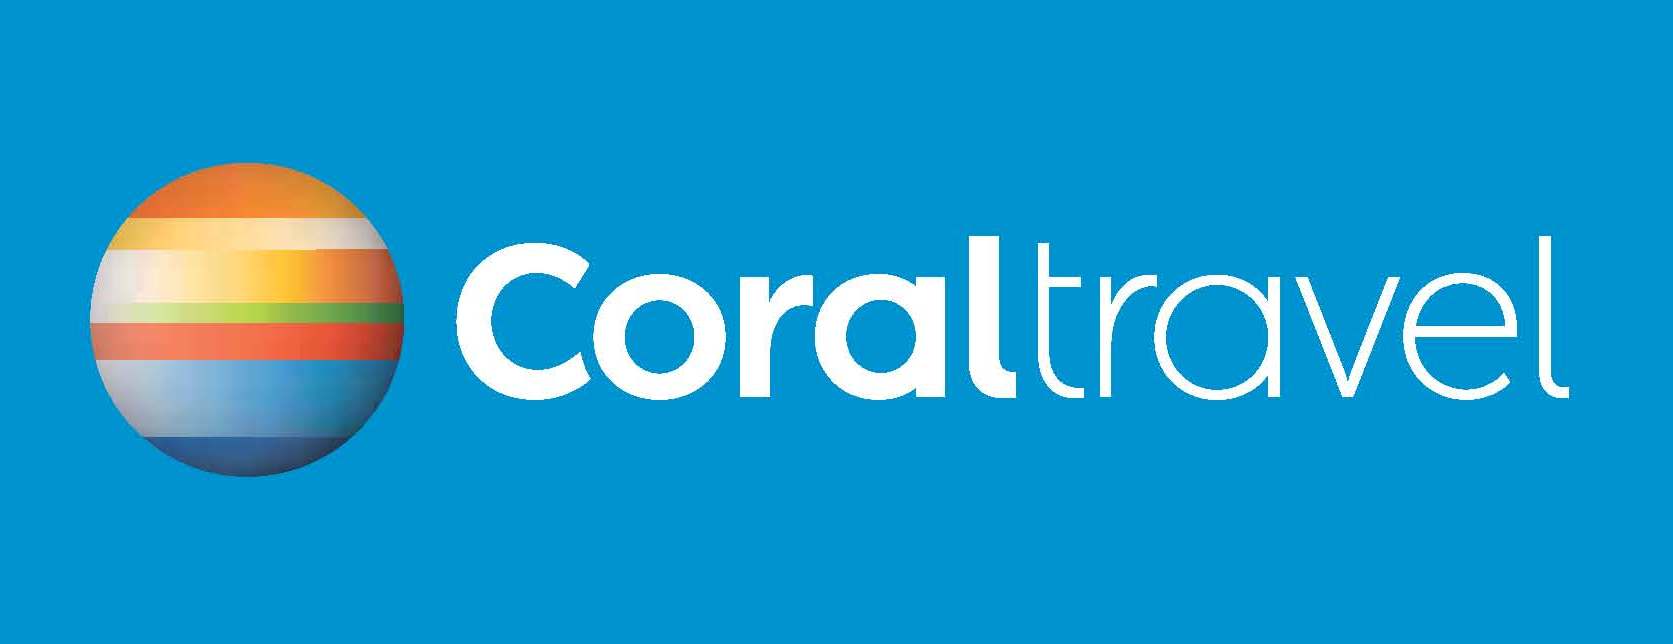 http://dt.by/wp-content/uploads/2014/10/Coral_logo.jpg